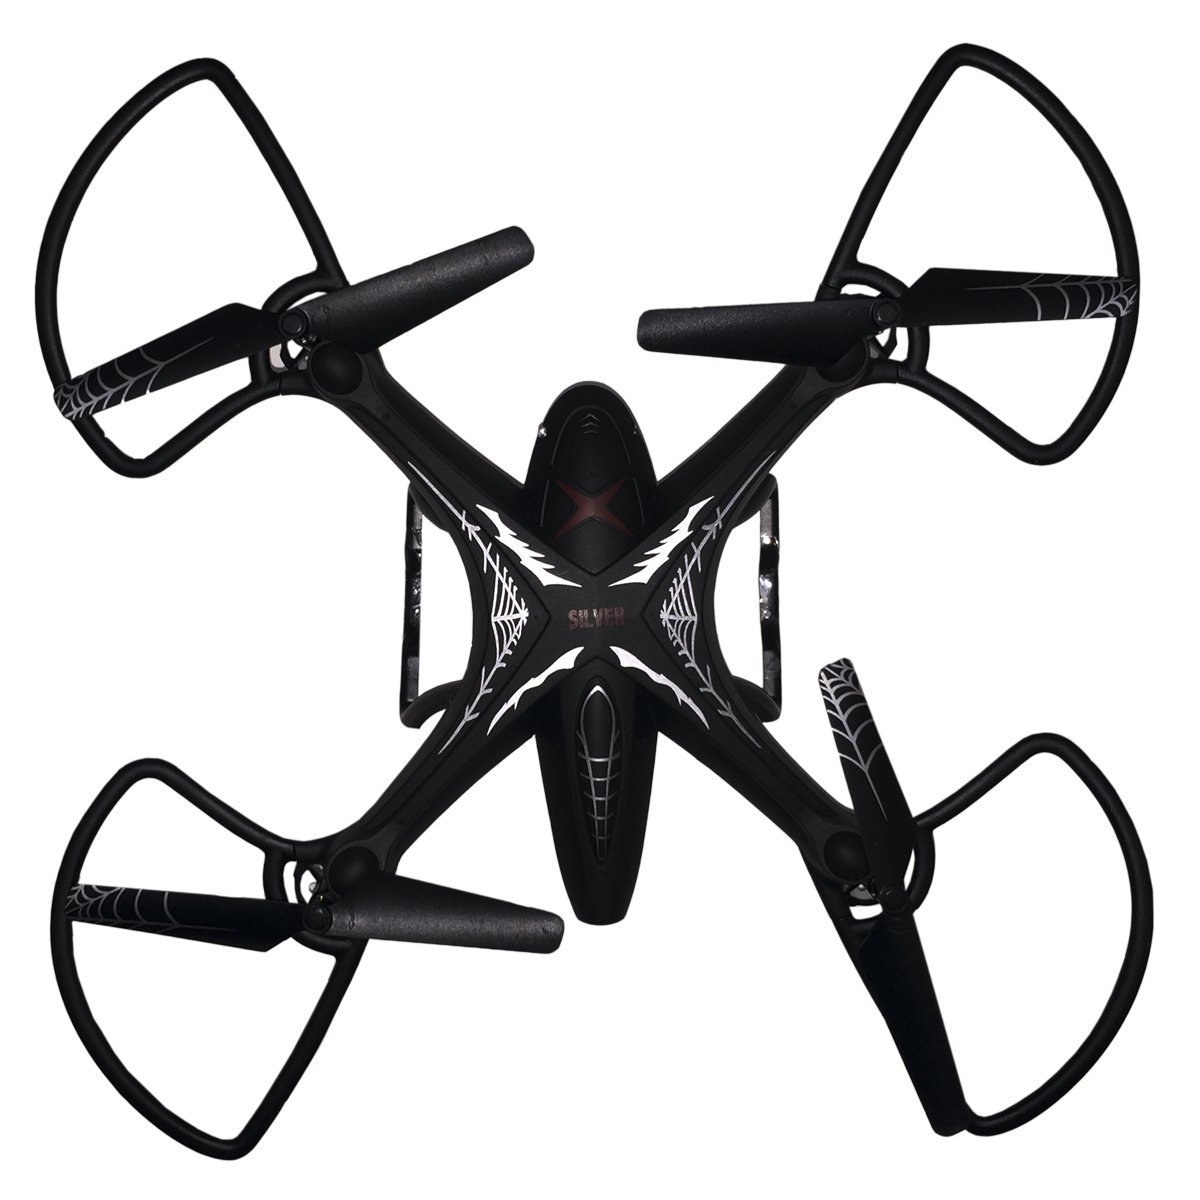 Dron Anfibio 4-Axis 2.4Ghz 4Canales 8Min